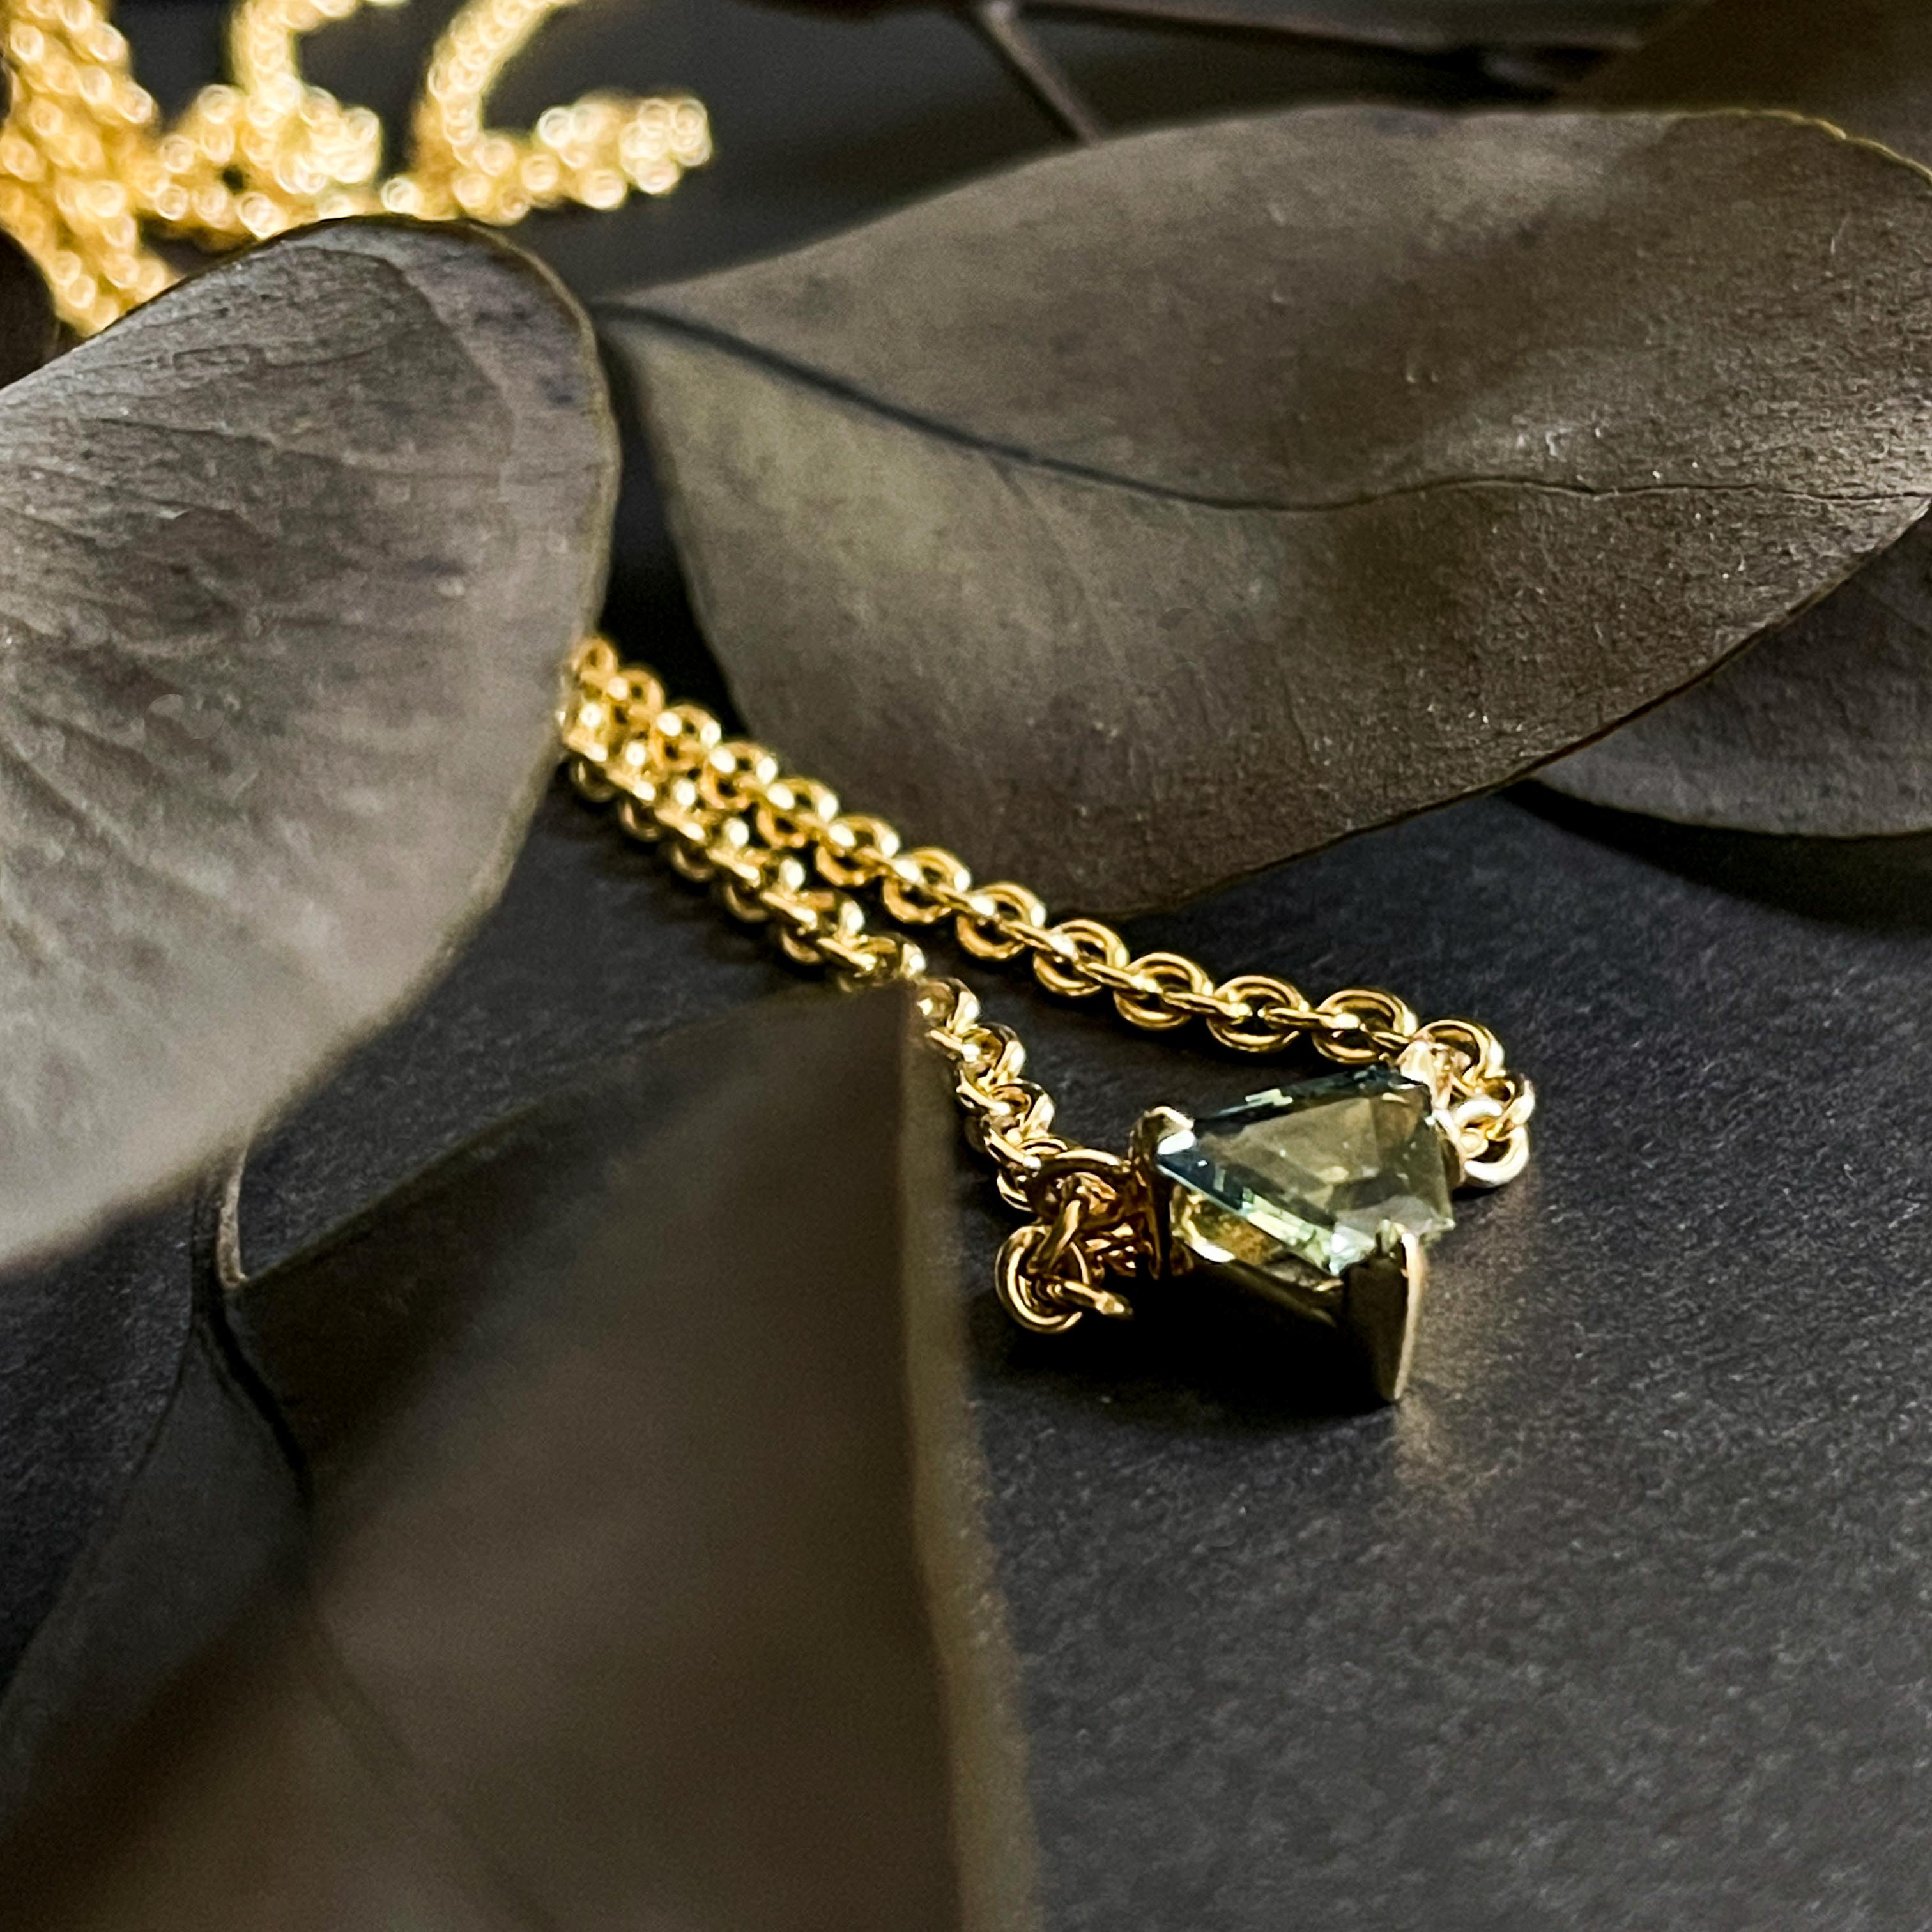 PARKER: Yellow Gold Trapezoid Green Sapphire Necklace